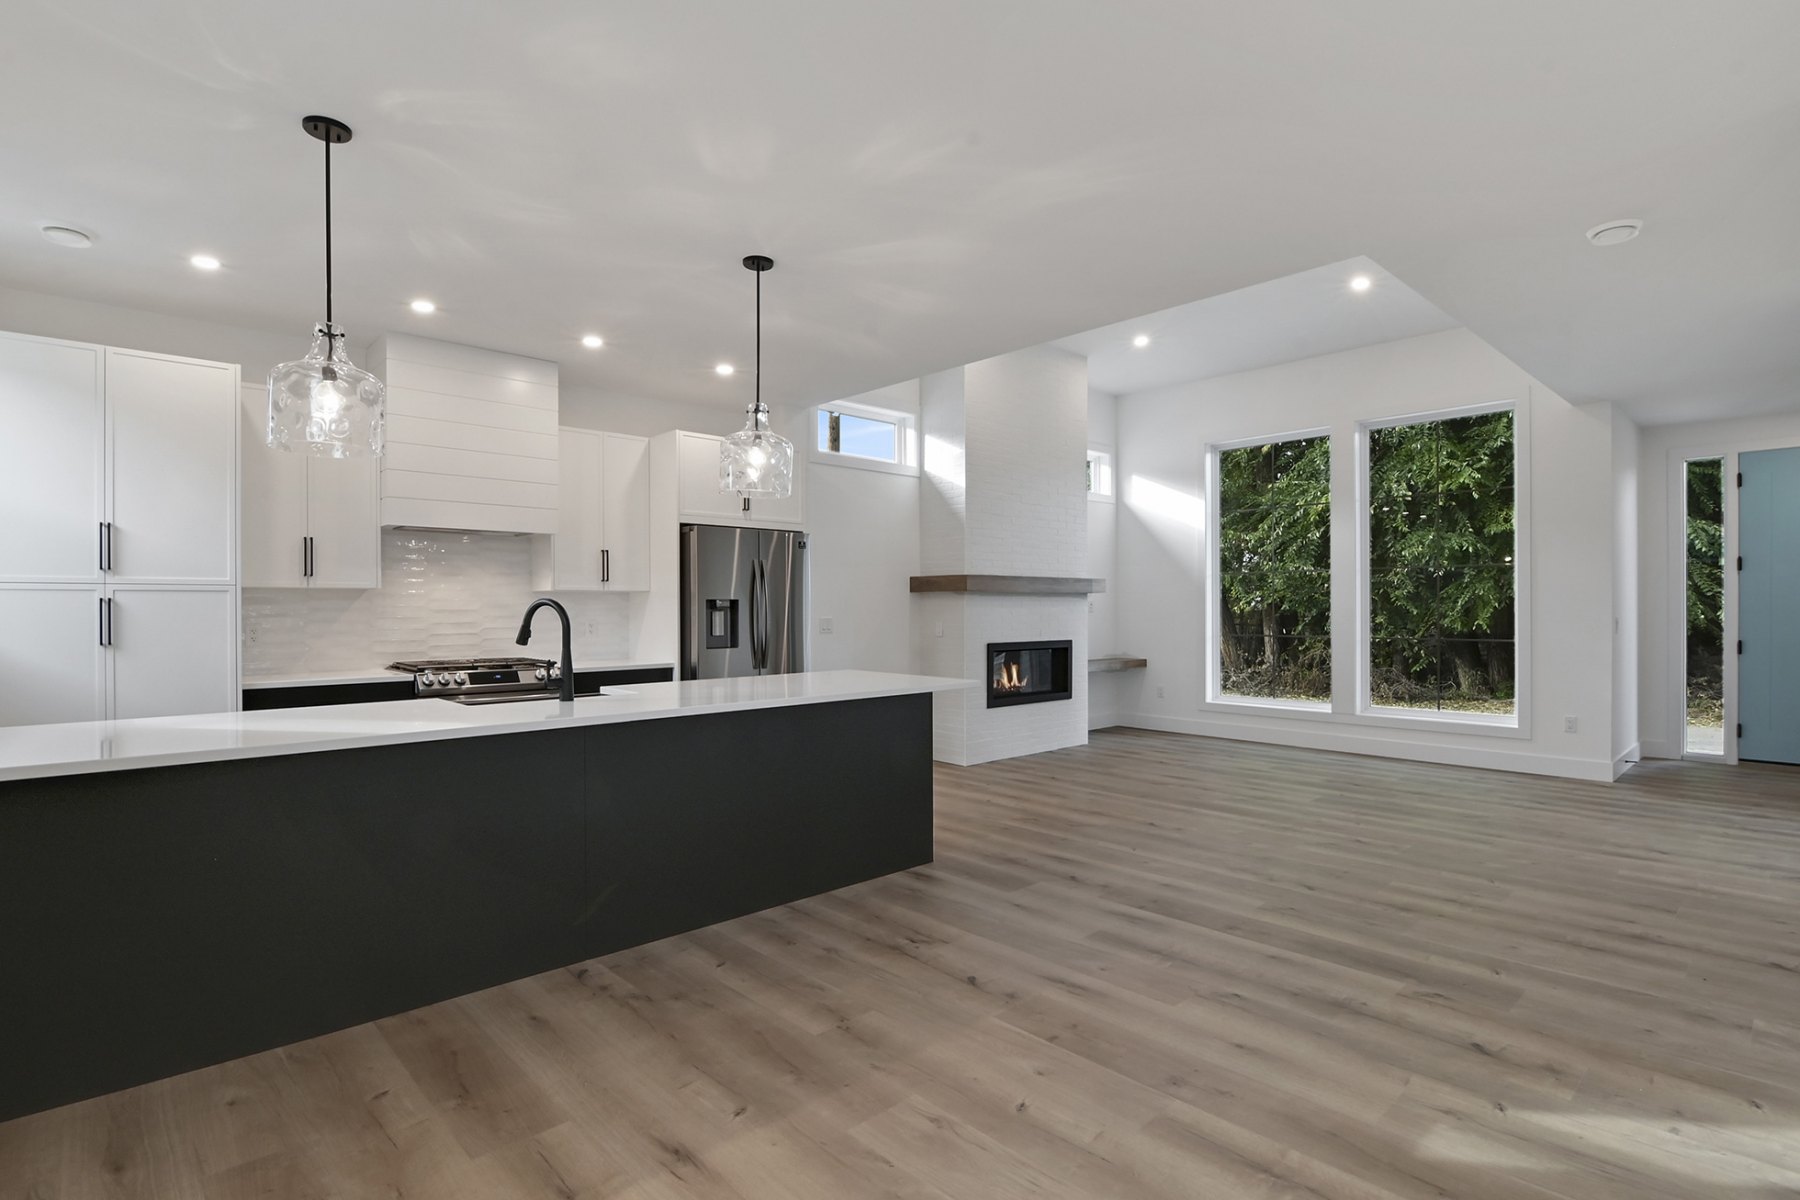 1_harmony_homes_patterson_ave_infill_project_kitchen_area_gallery_image_11